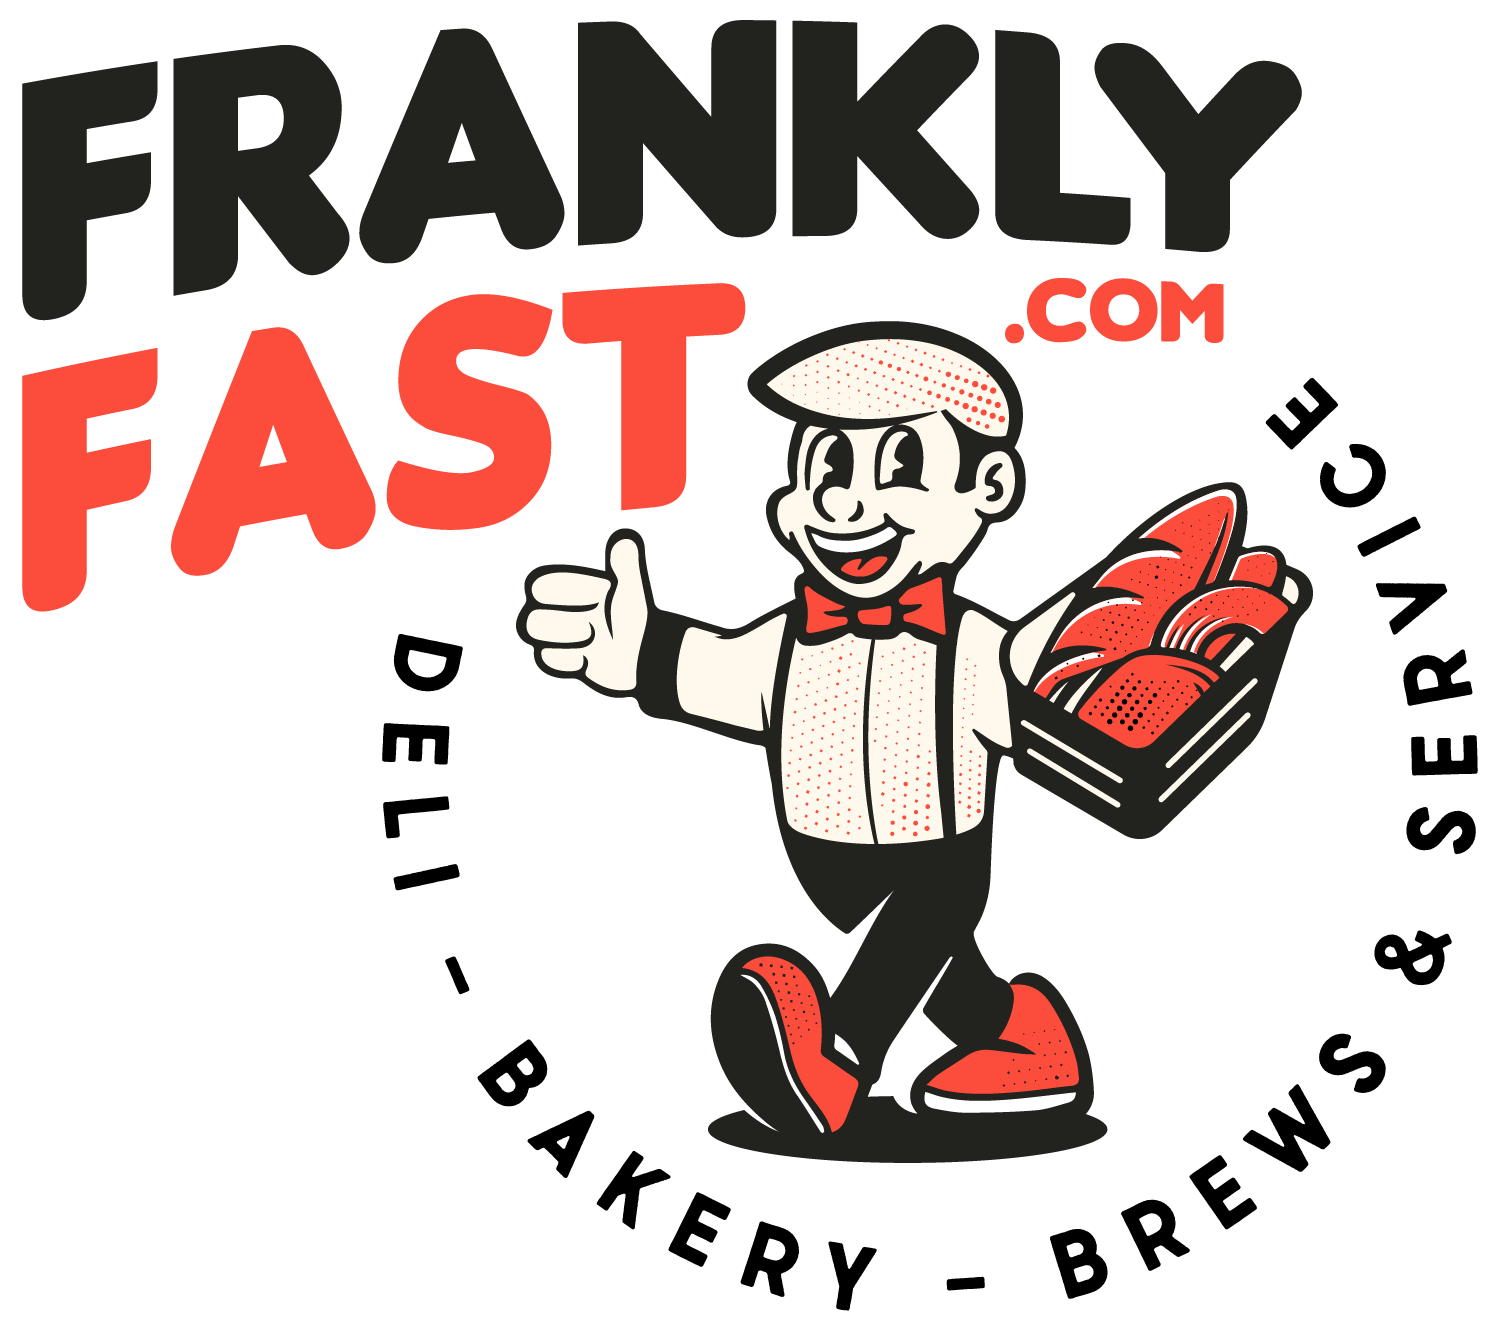 Frankly Fast coming soon